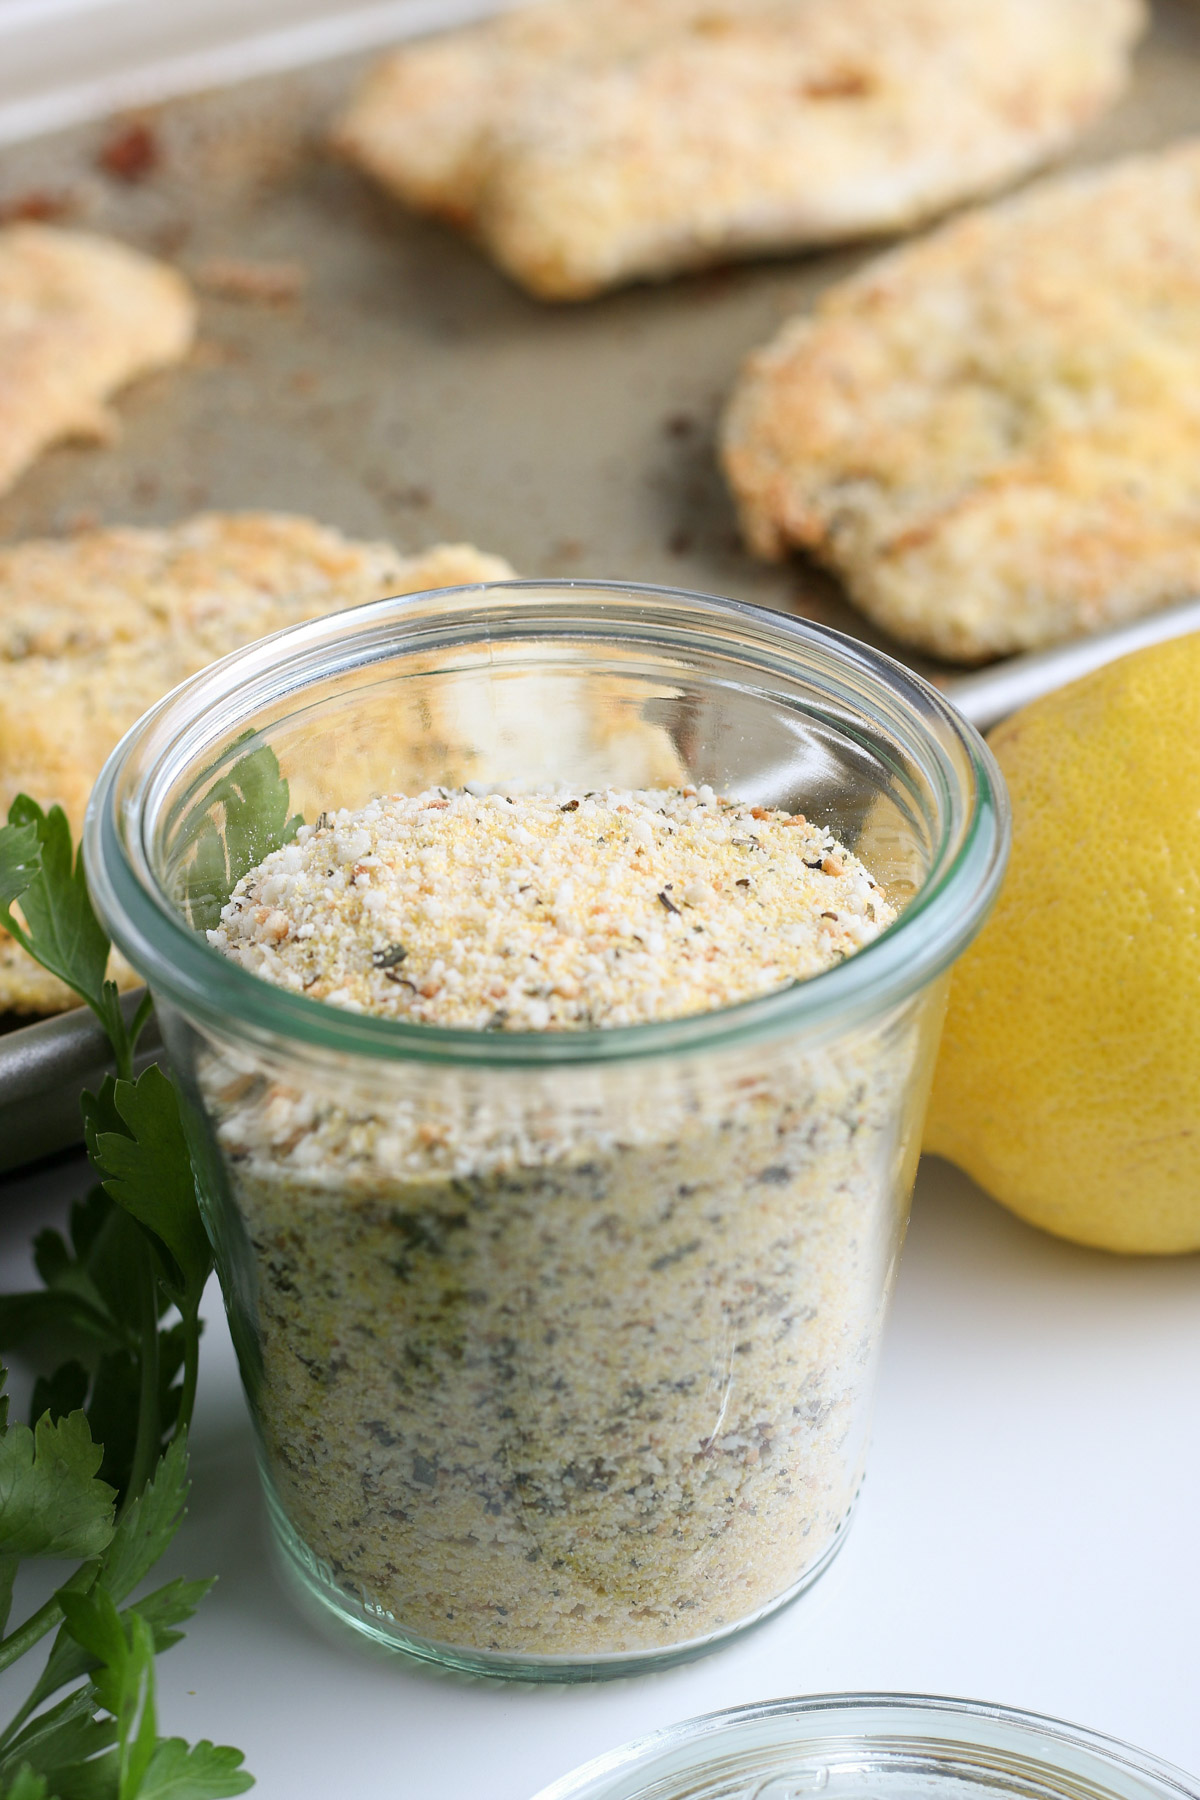 Glass jar of breading mixture for crunchy oven fried breaded tilapia with lemon, parsley and breaded fish in background.